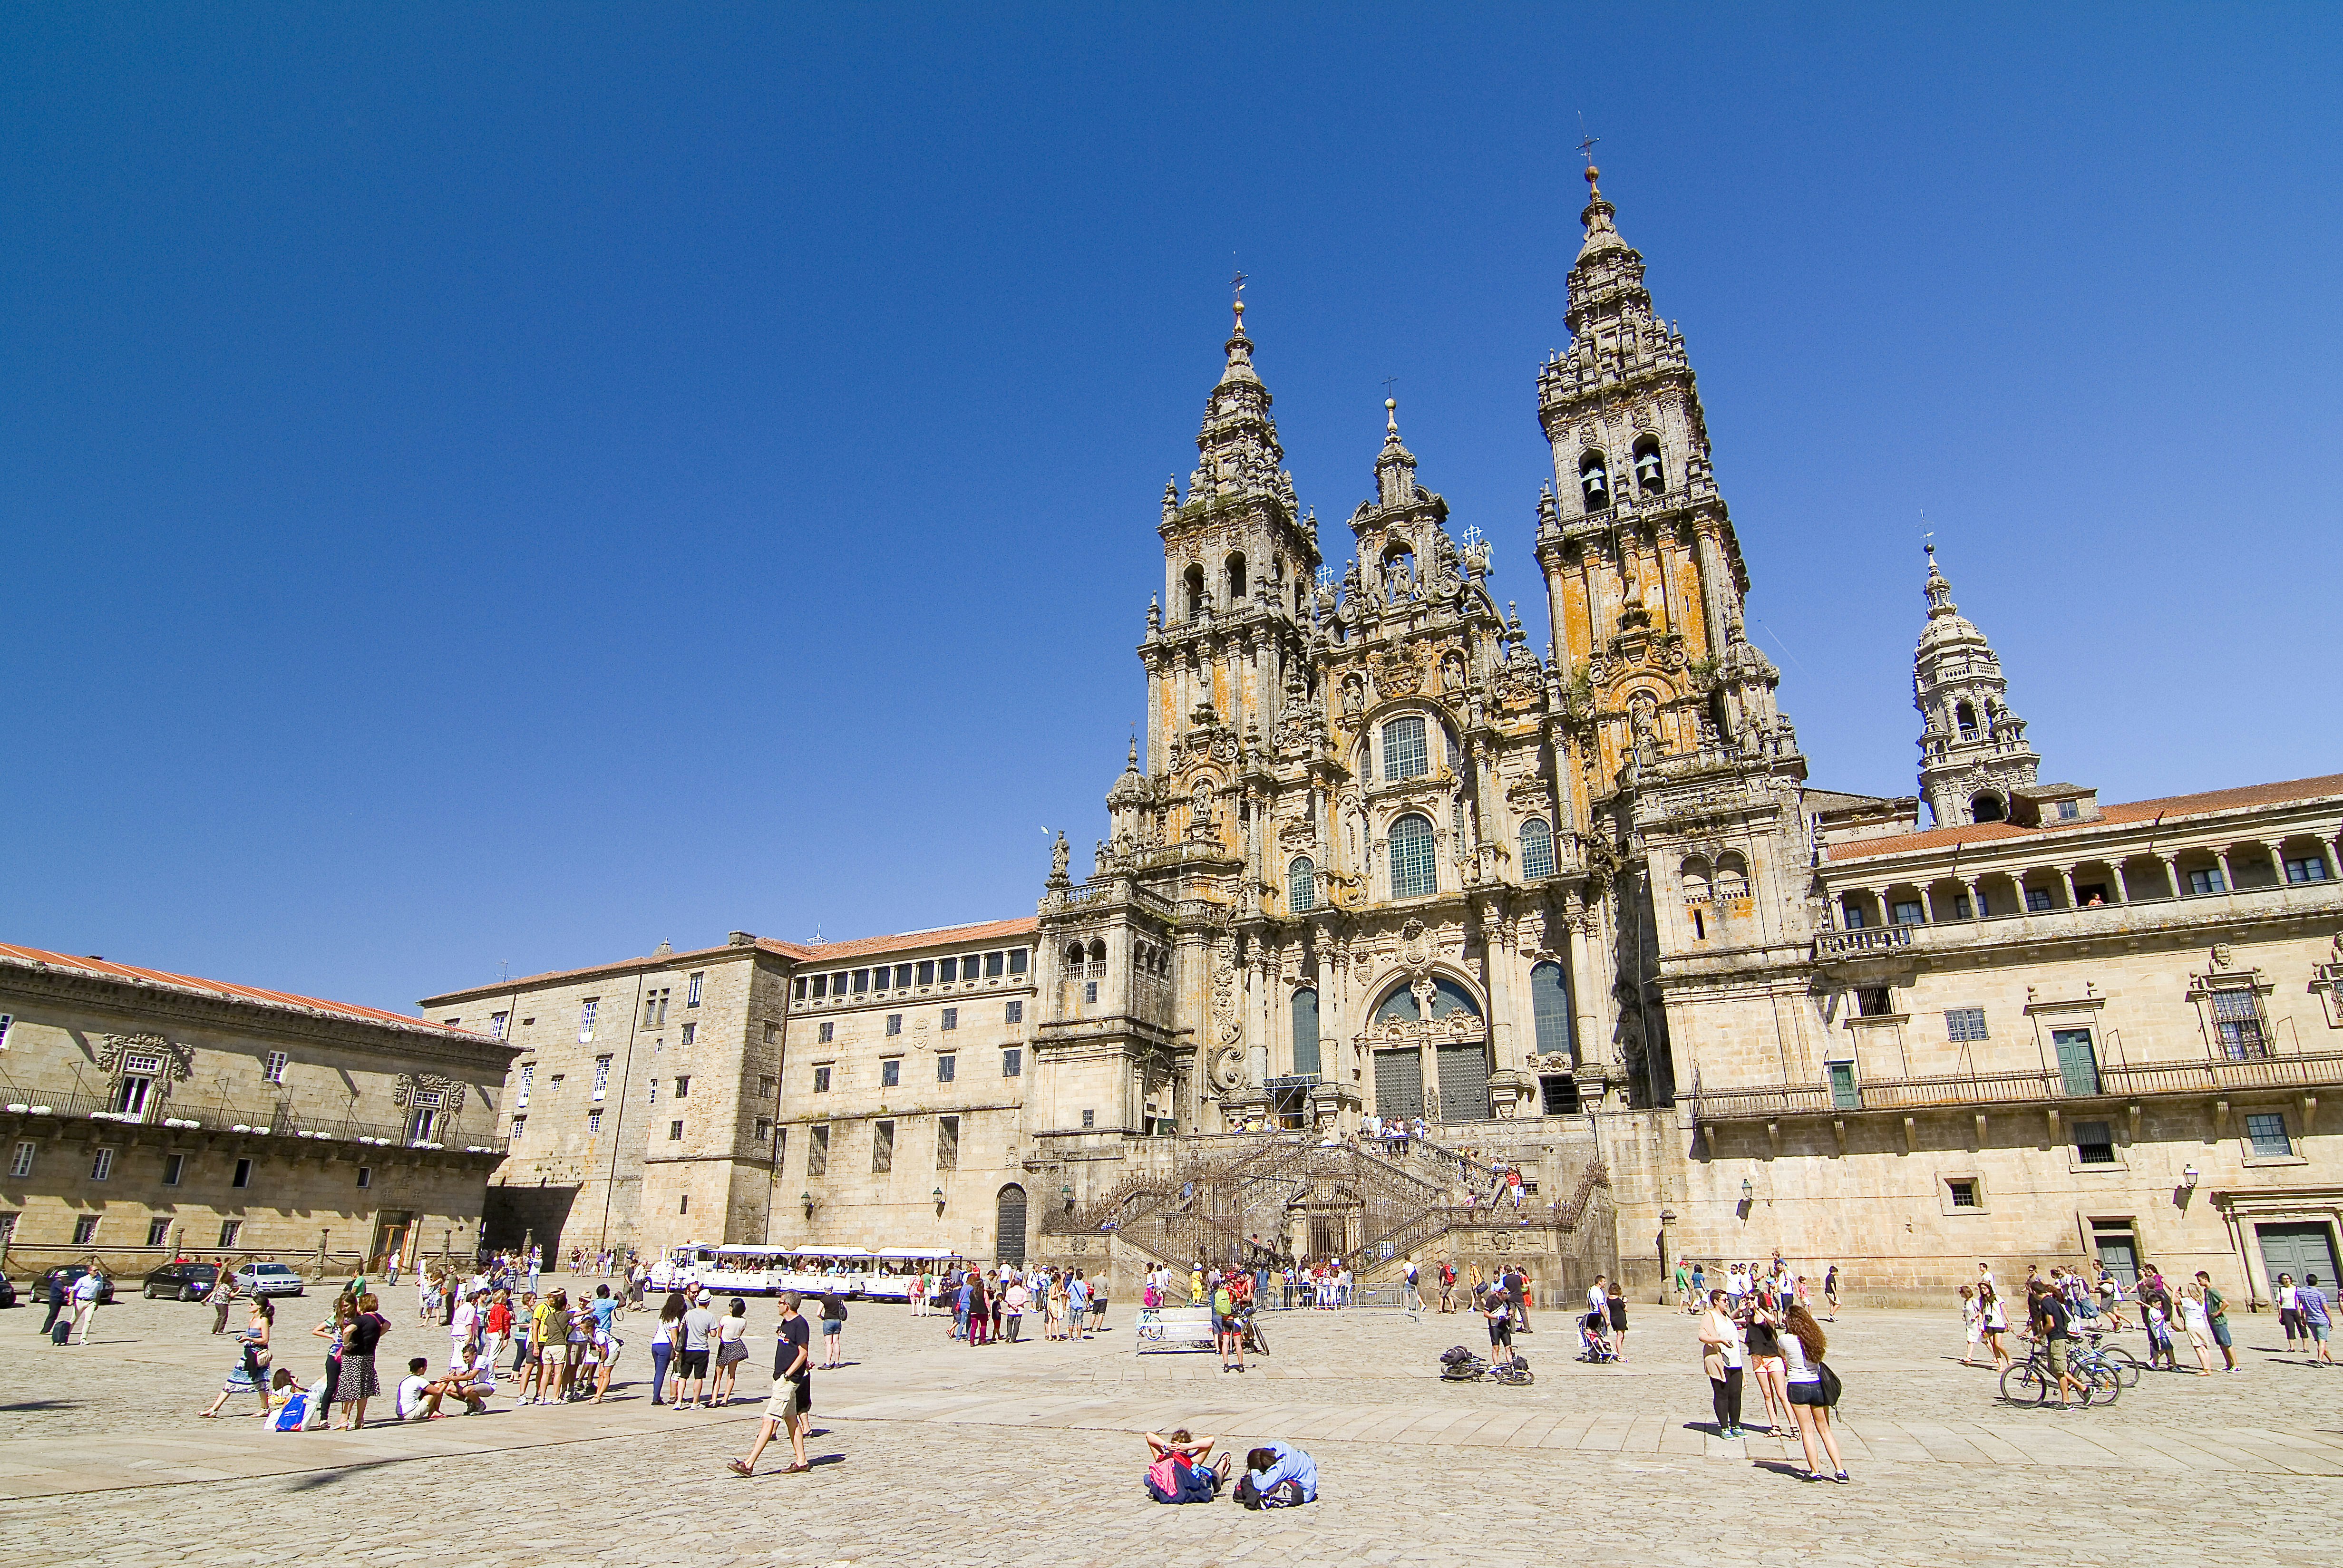 A large public square is dominated by the Catedral de Santiago de Compostela; there's a bright blue sky and many people are milling around in the square.